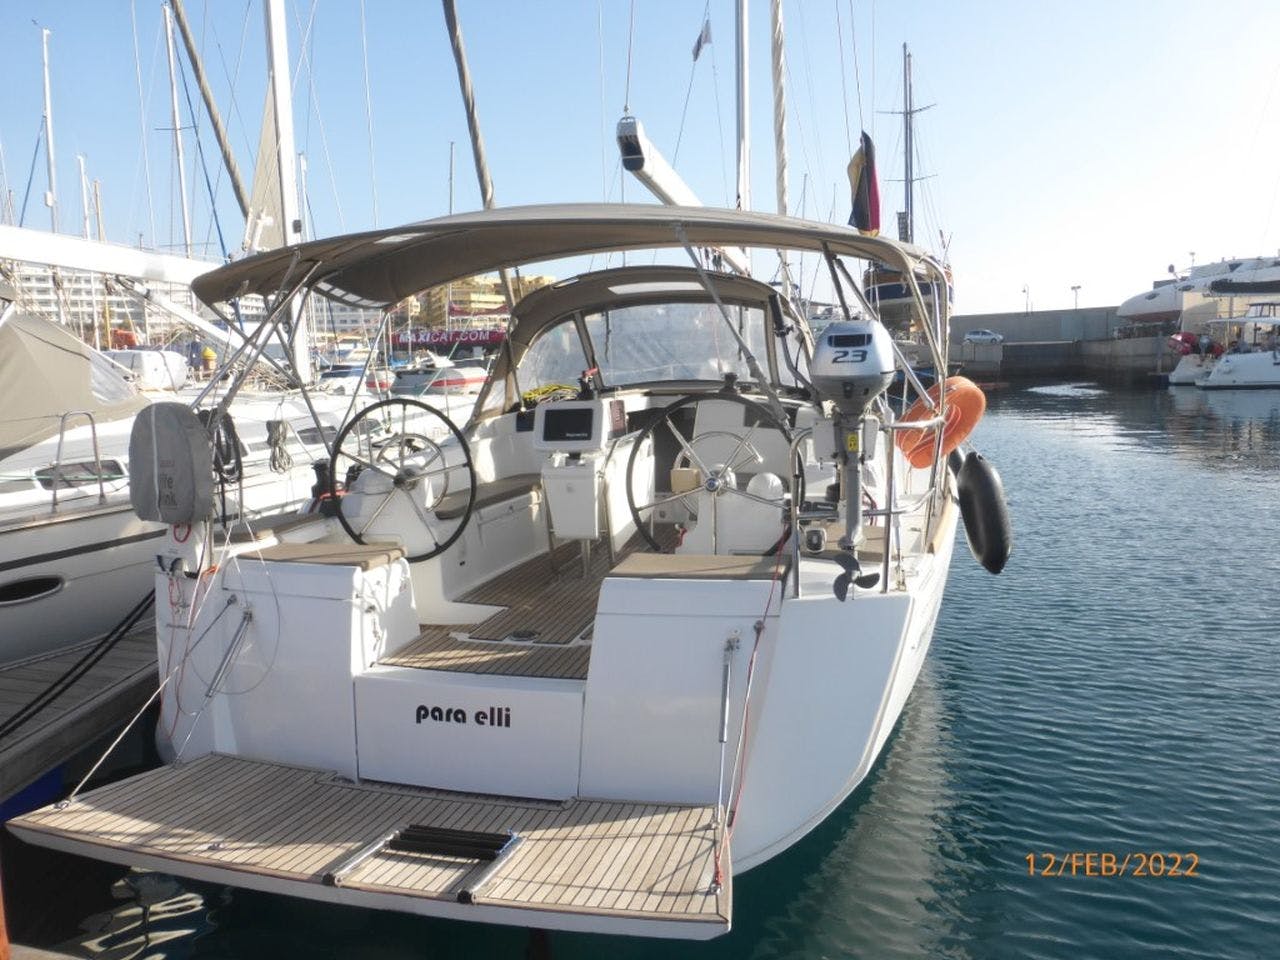 Book Sun Odyssey 419 Sailing yacht for bareboat charter in Tenerife, San Miguel Marina, Canary Islands, Spain with TripYacht!, picture 1